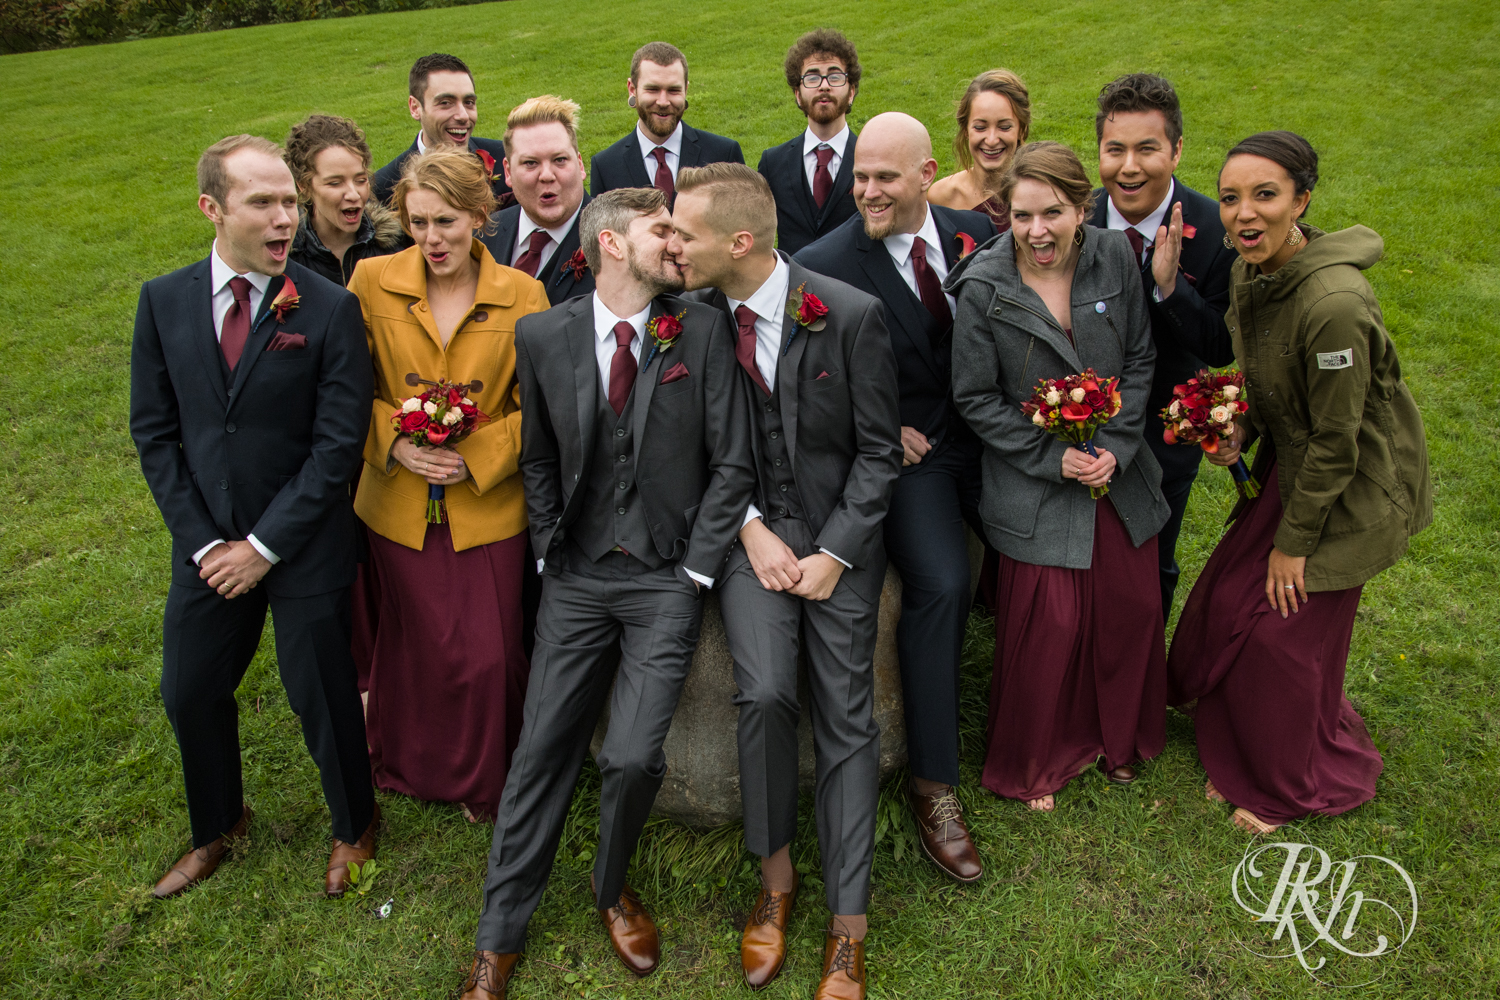 Wedding party smiles while grooms kiss at Bohemian Flats Park in Minneapolis, Minnesota for Minnesota LGBT wedding photographer.